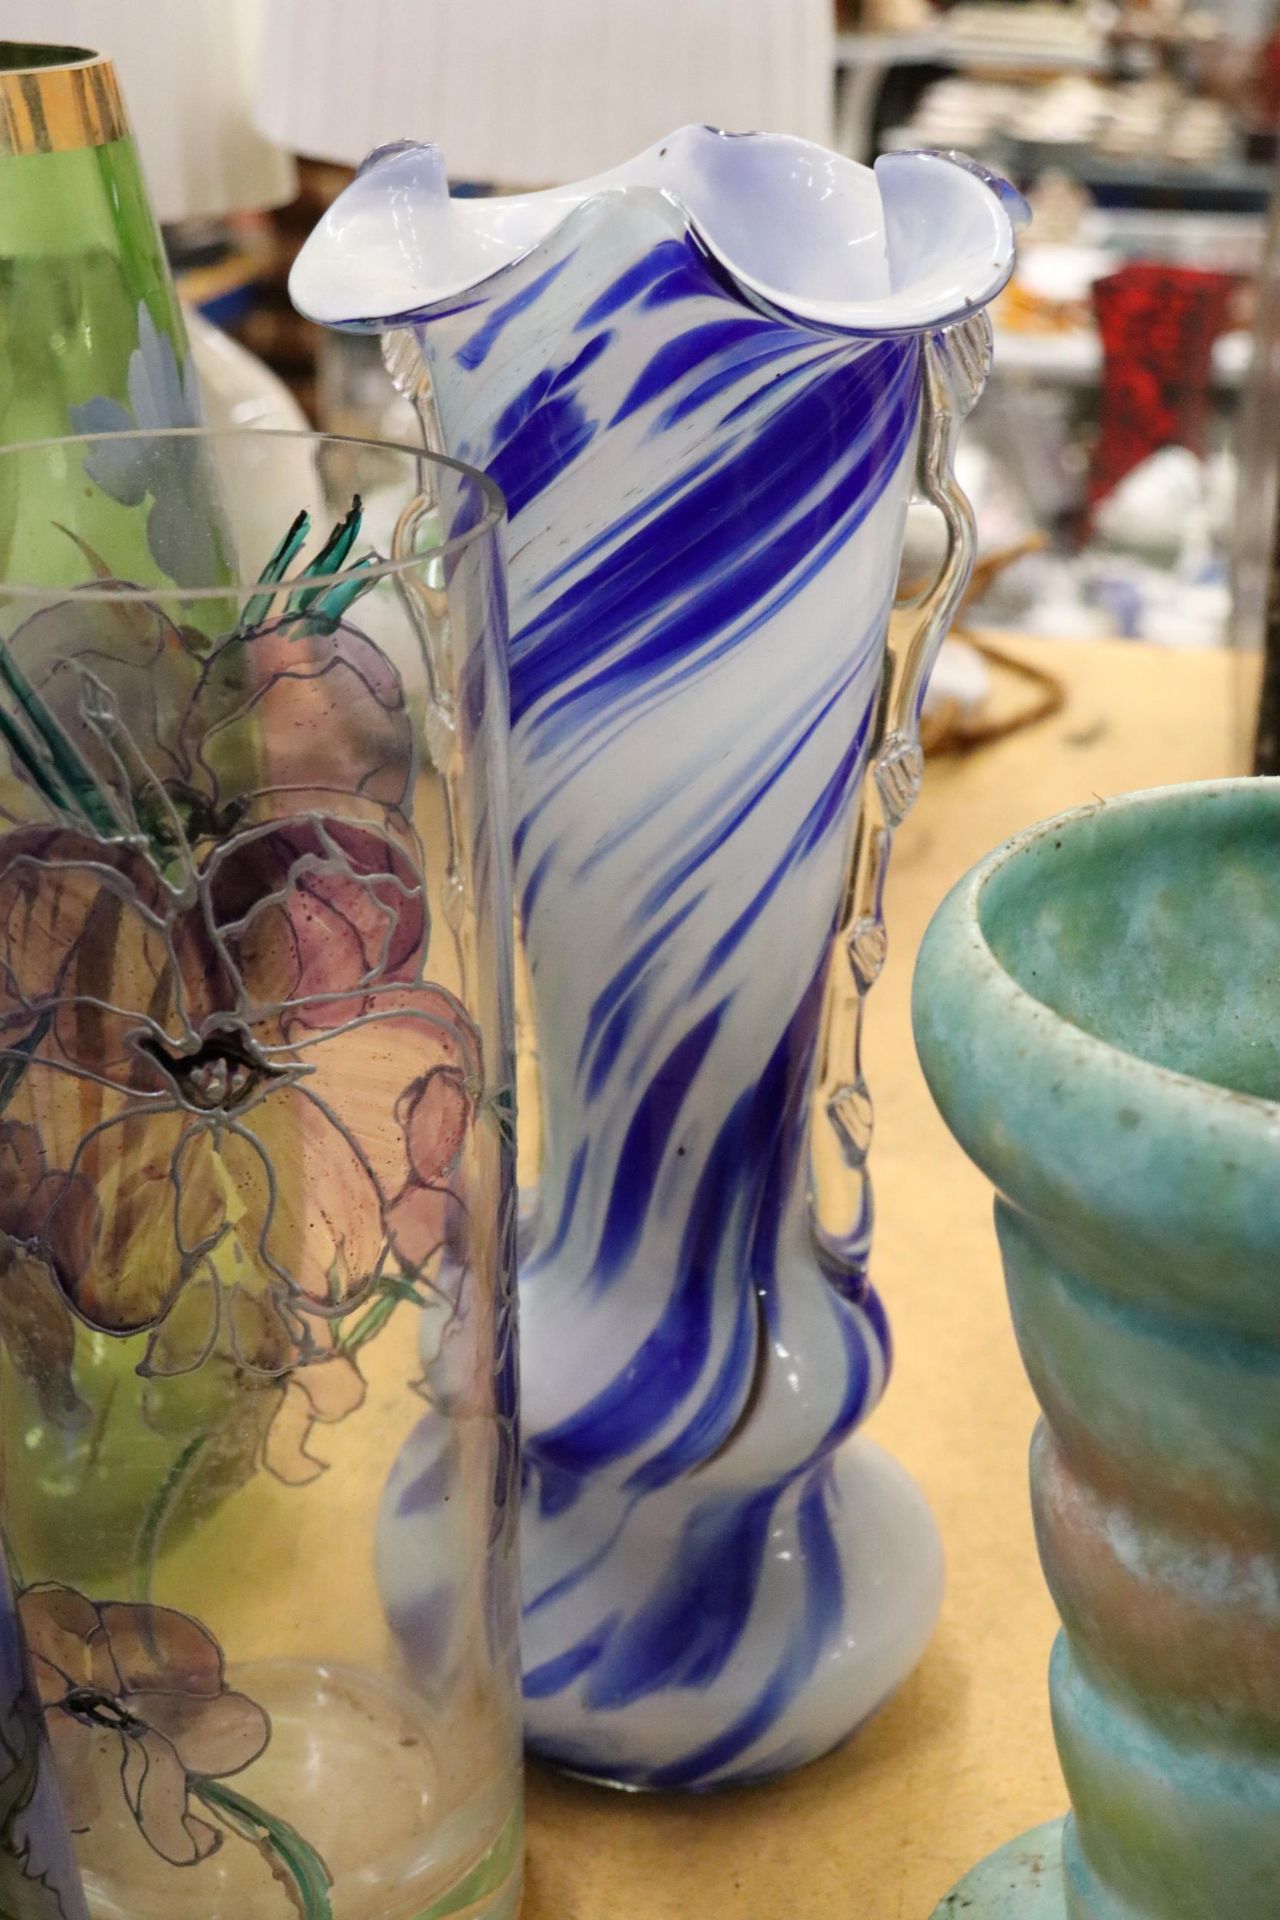 A LARGE MIXED LOT OF PAINTED ON GLASS VASES PLUS ONE DELCROFT WARE CERAMIC VASE - Bild 6 aus 11